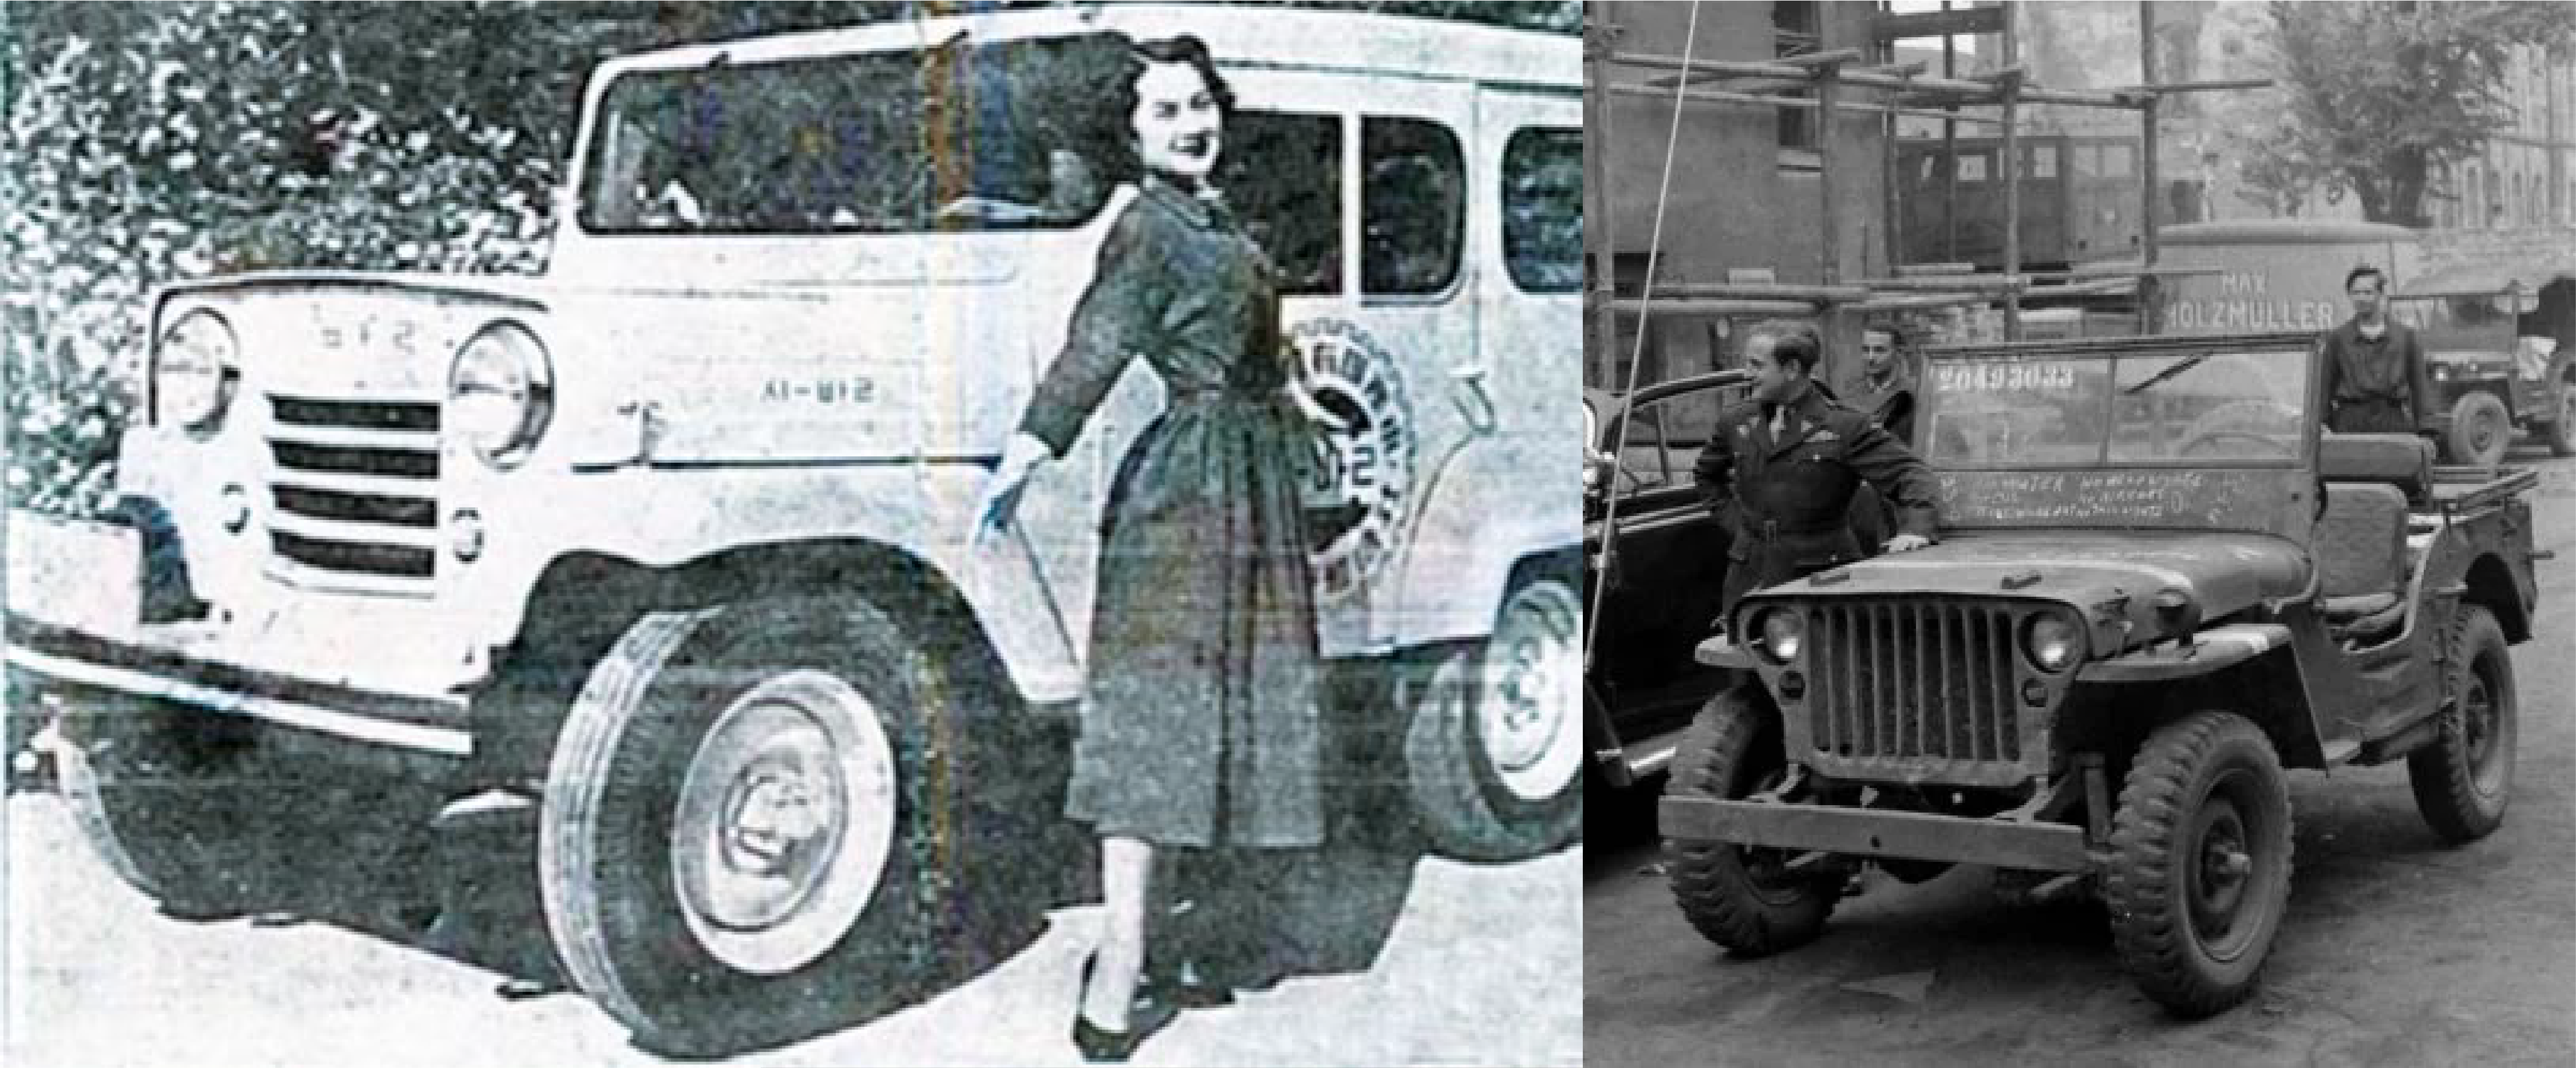 Korea's first car Sibal on the left and Willys Jeep on the right